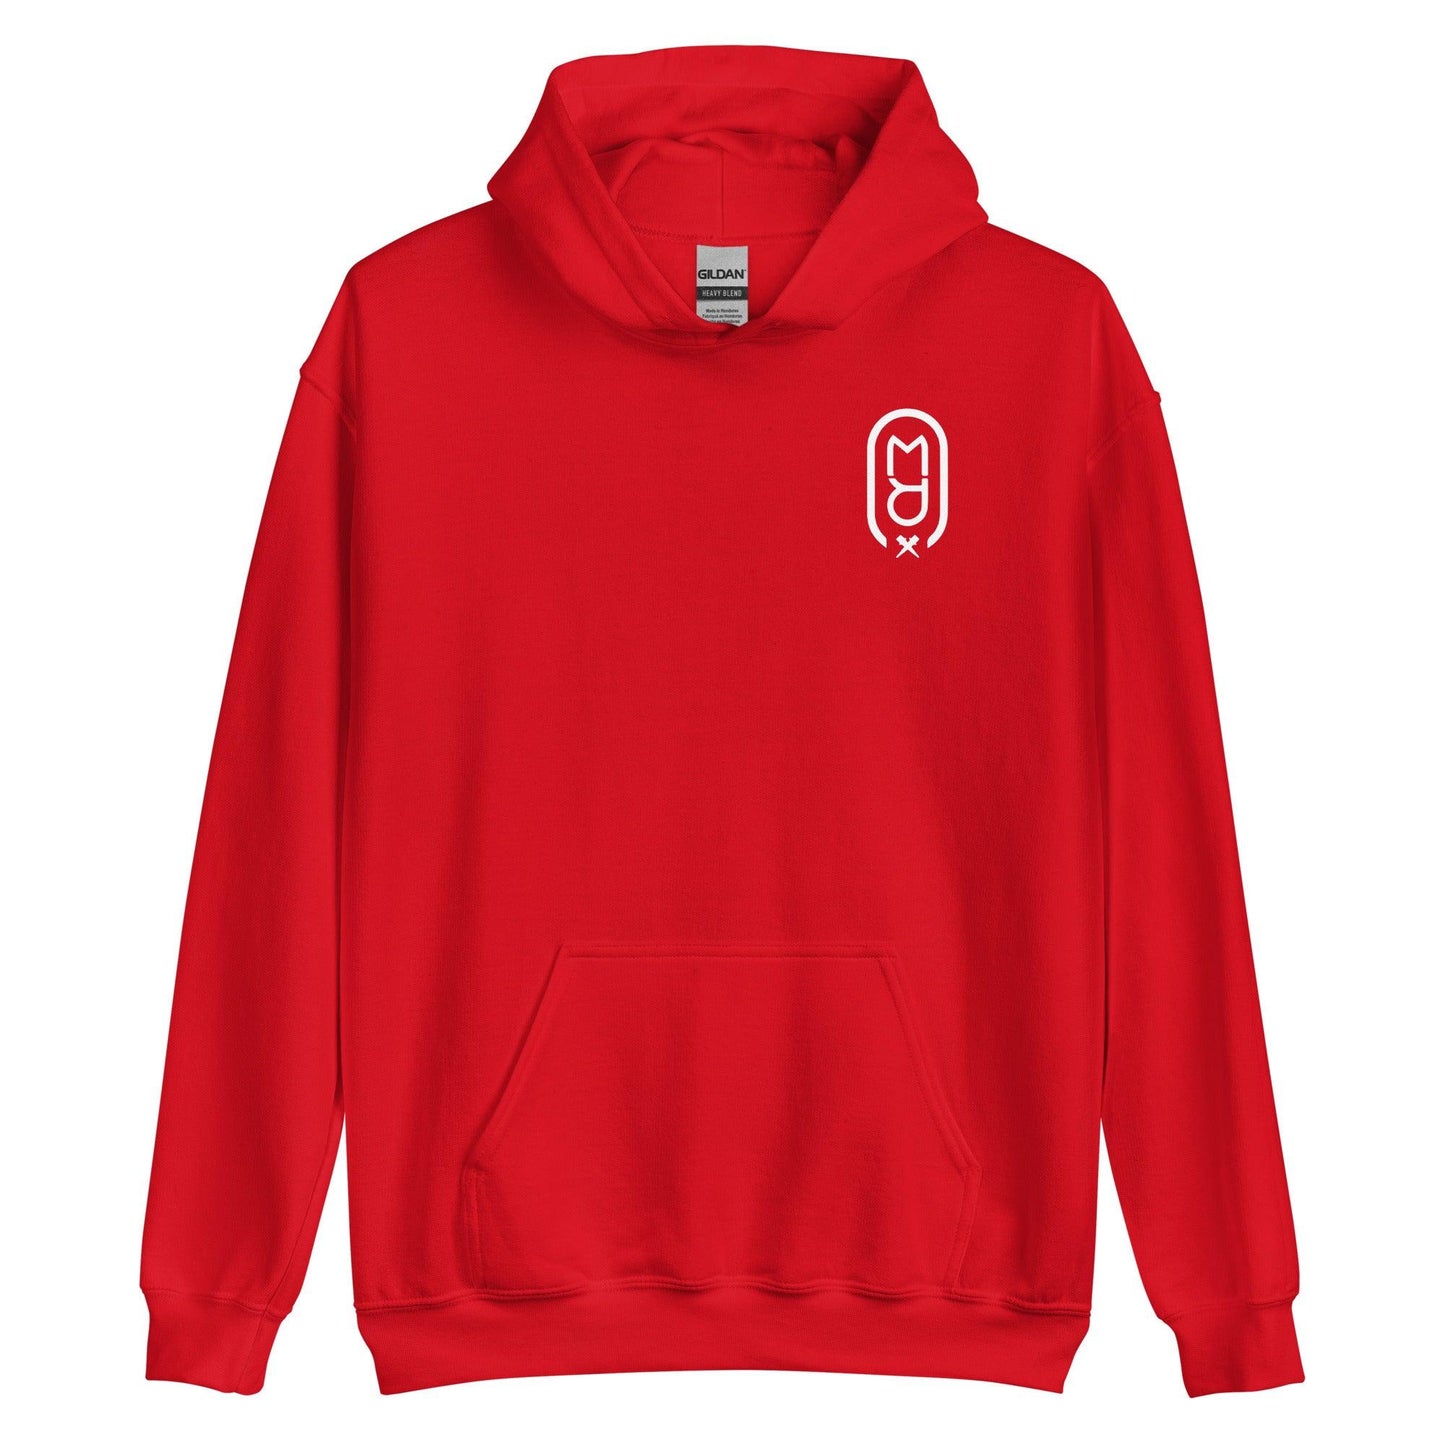 Mike Rodgers "Essential" Hoodie - Fan Arch